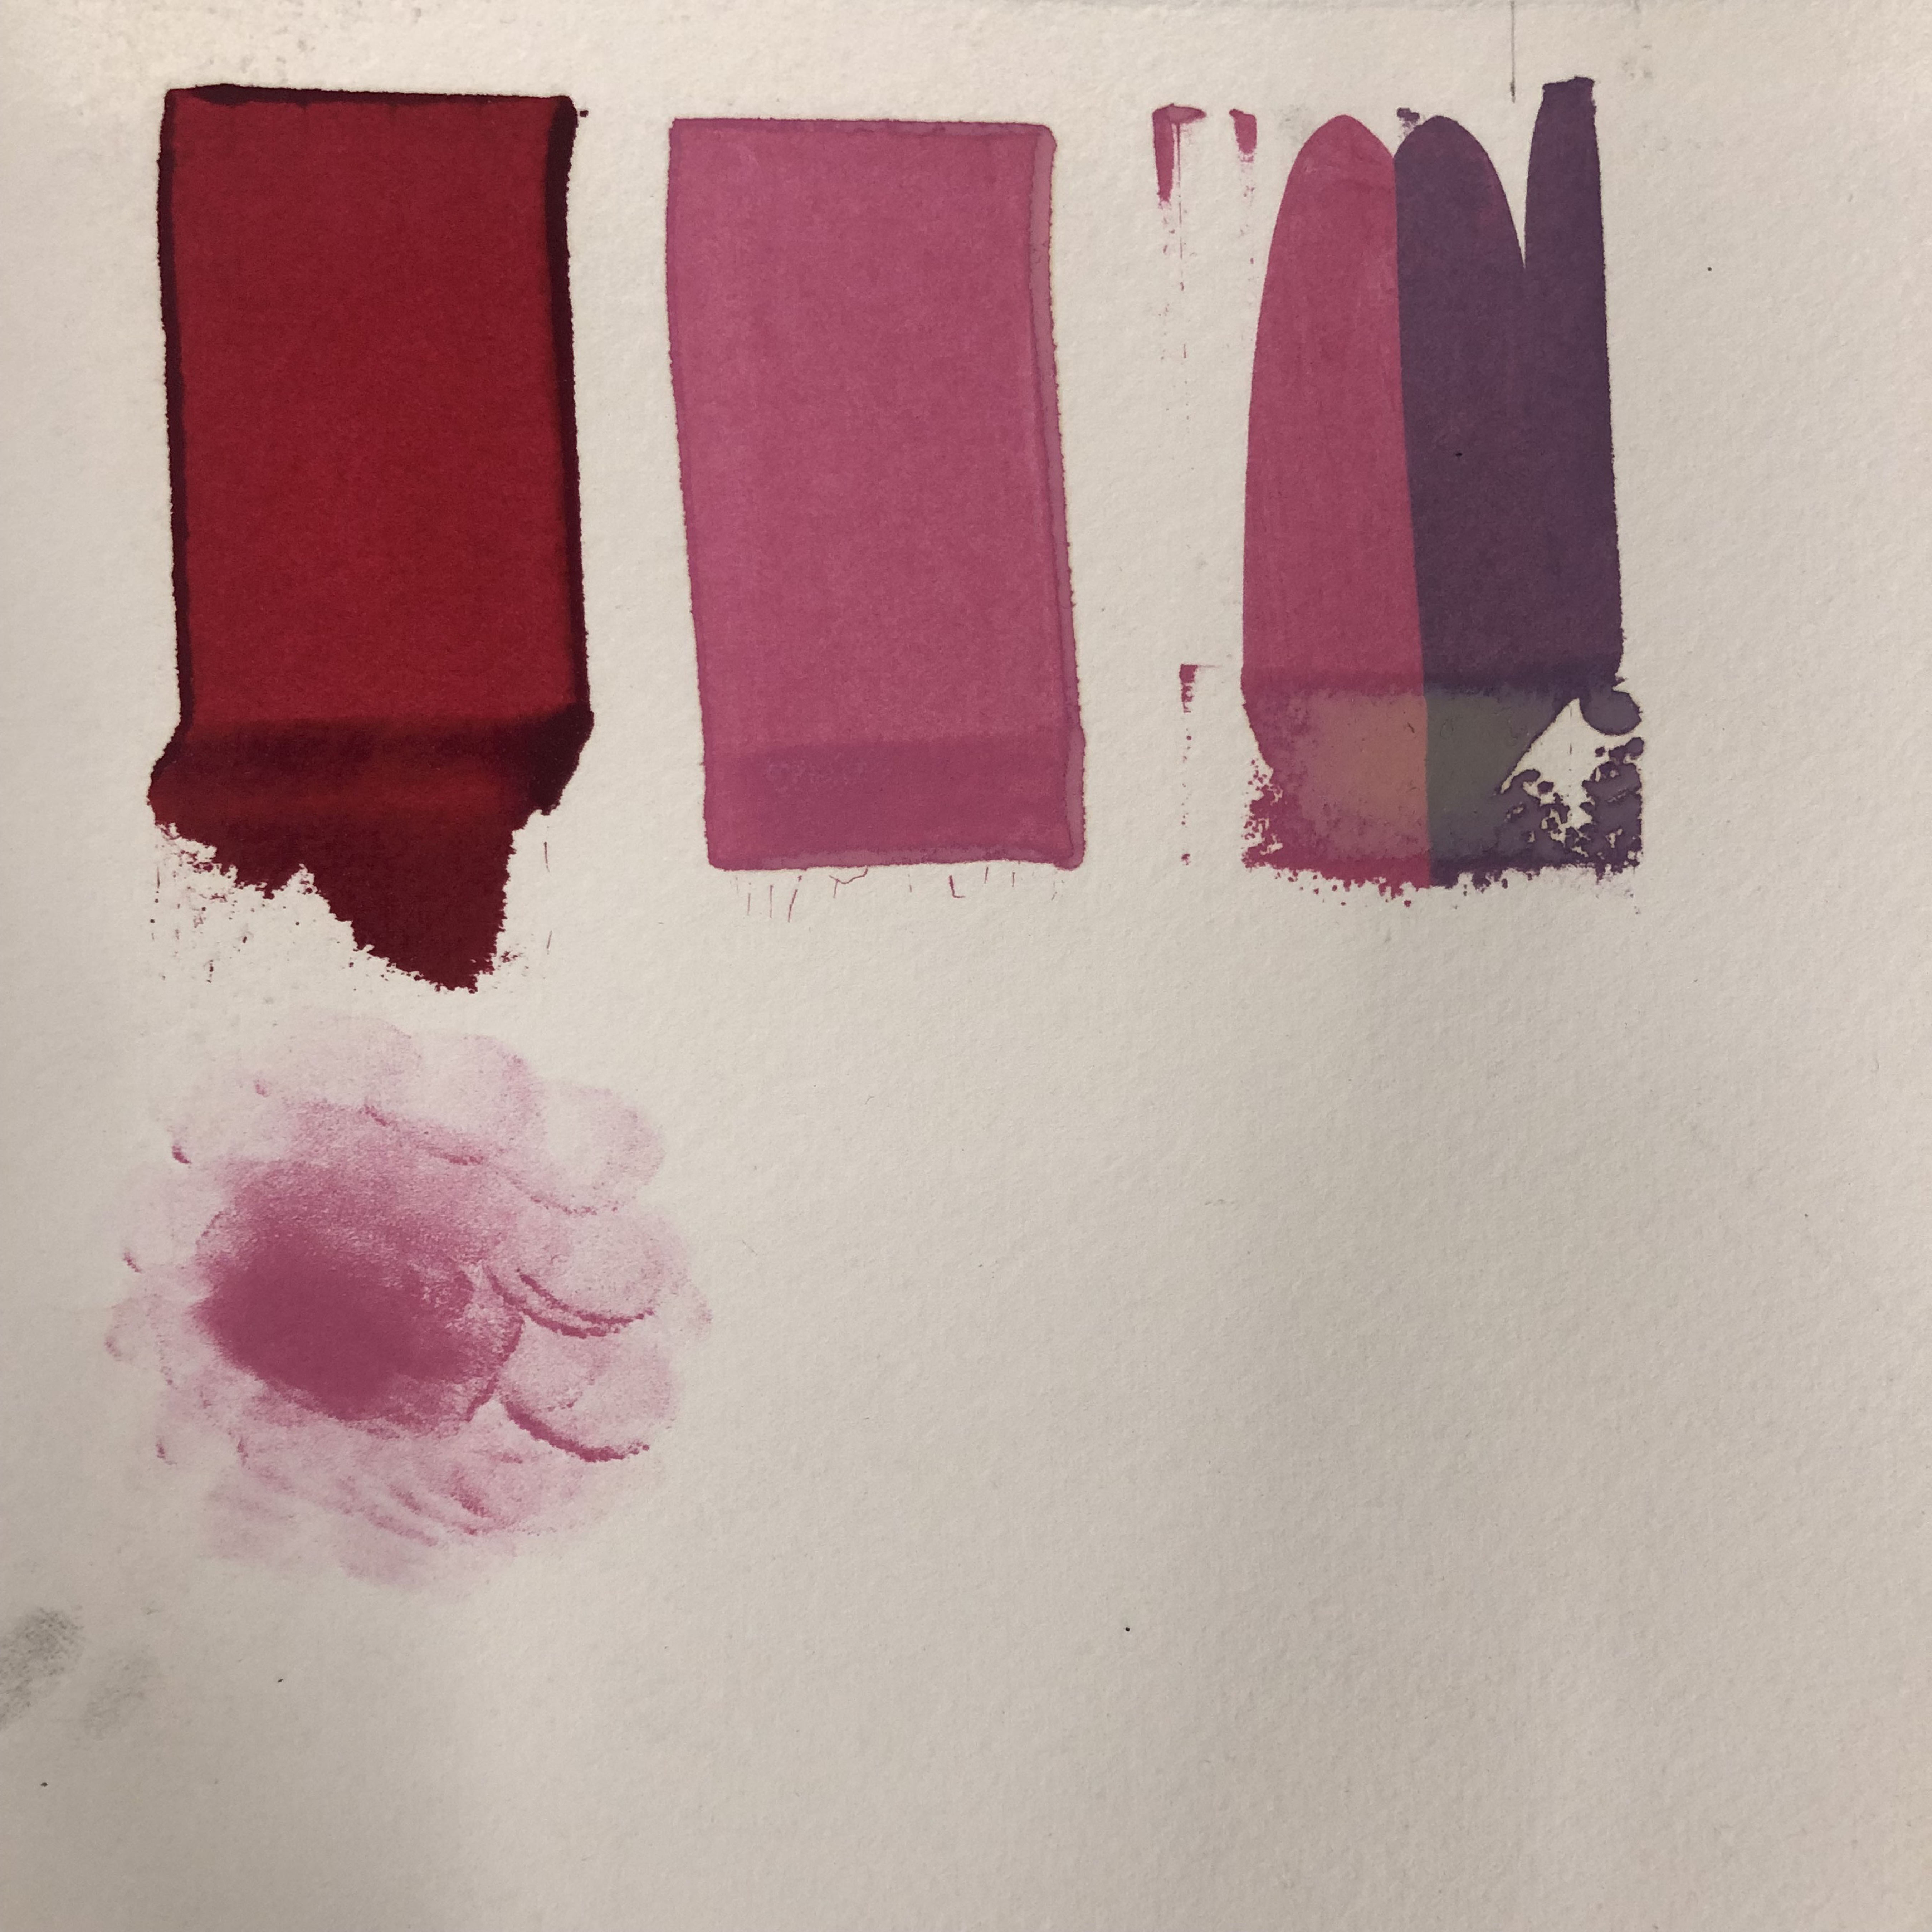 Drawdown of a red pigment